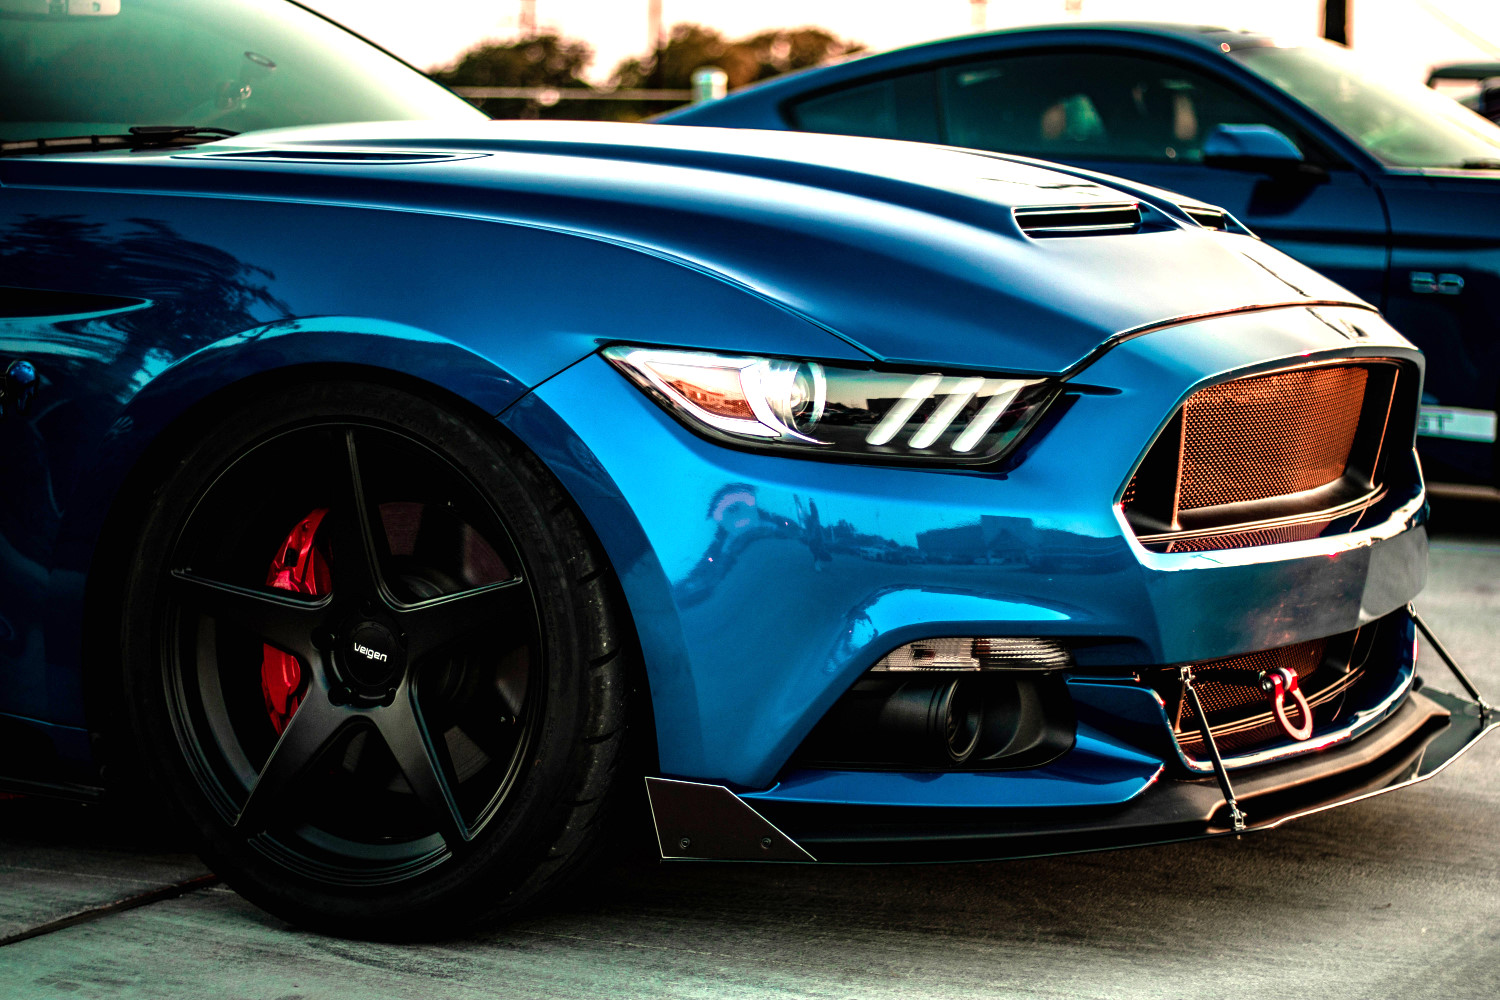 Sleek and Streamlined: Custom Grill Upgrade with No Emblem for Mustangs